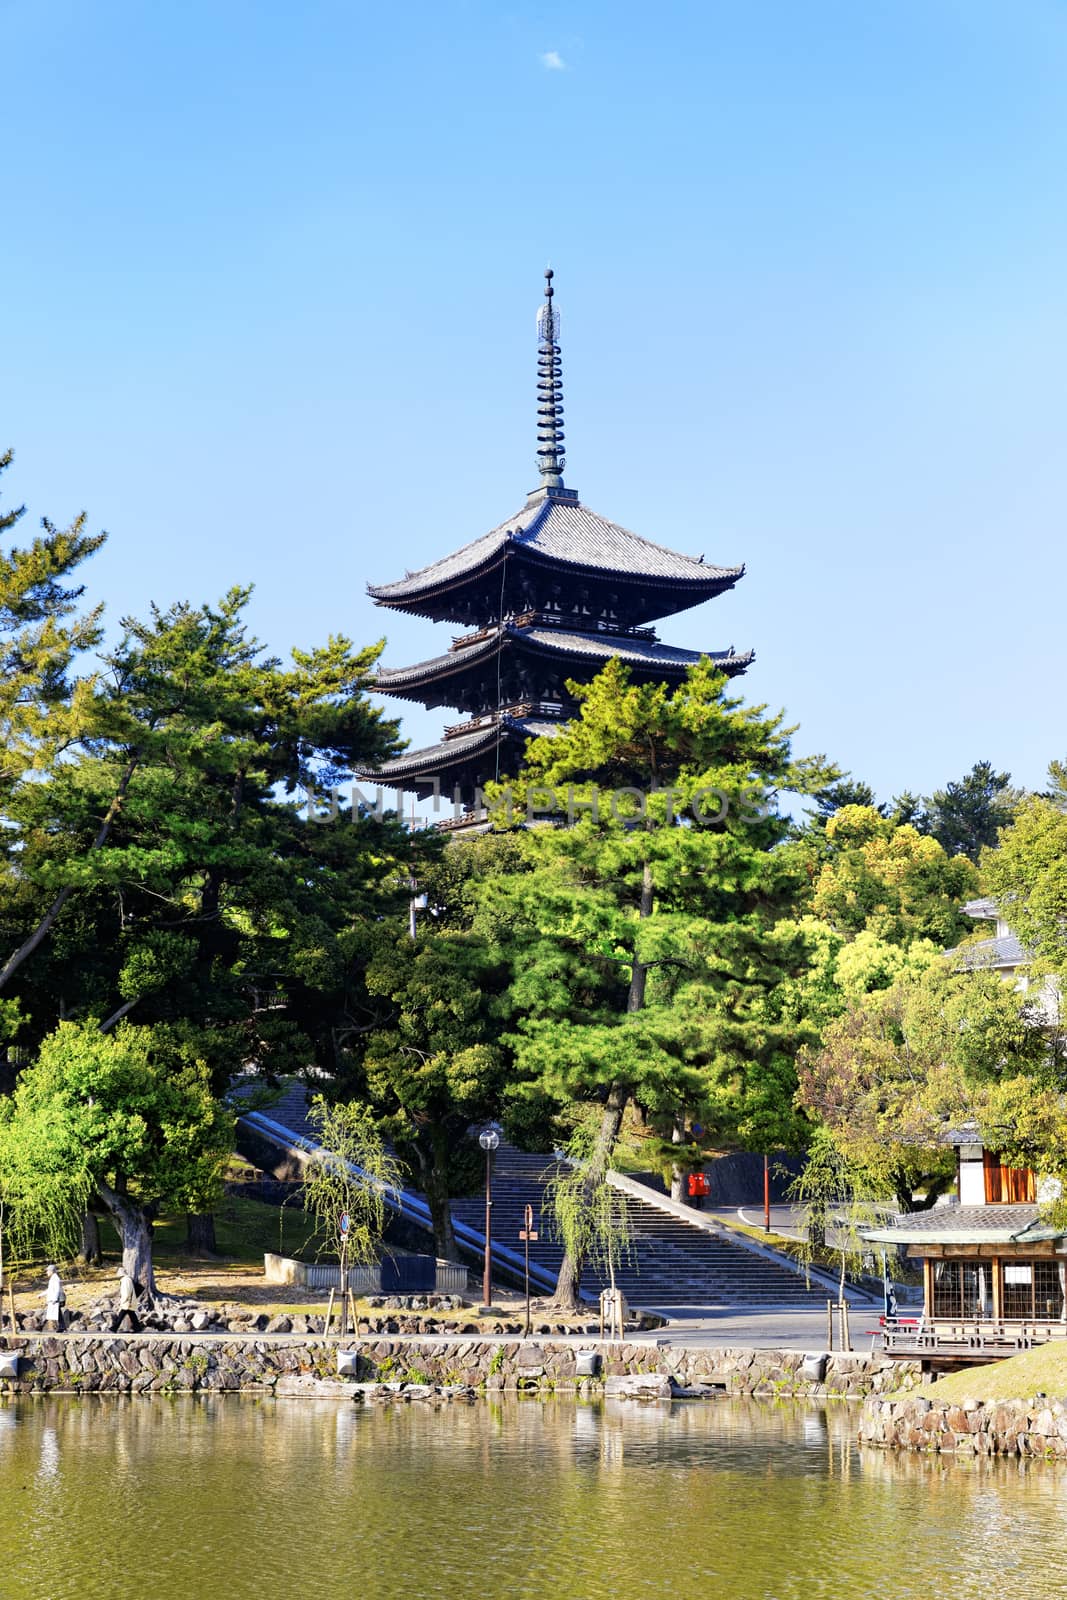 wooden tower of To-ji Temple in Nara Japan is the largest temple pagoda in the country at a height of 54.8 meters. 